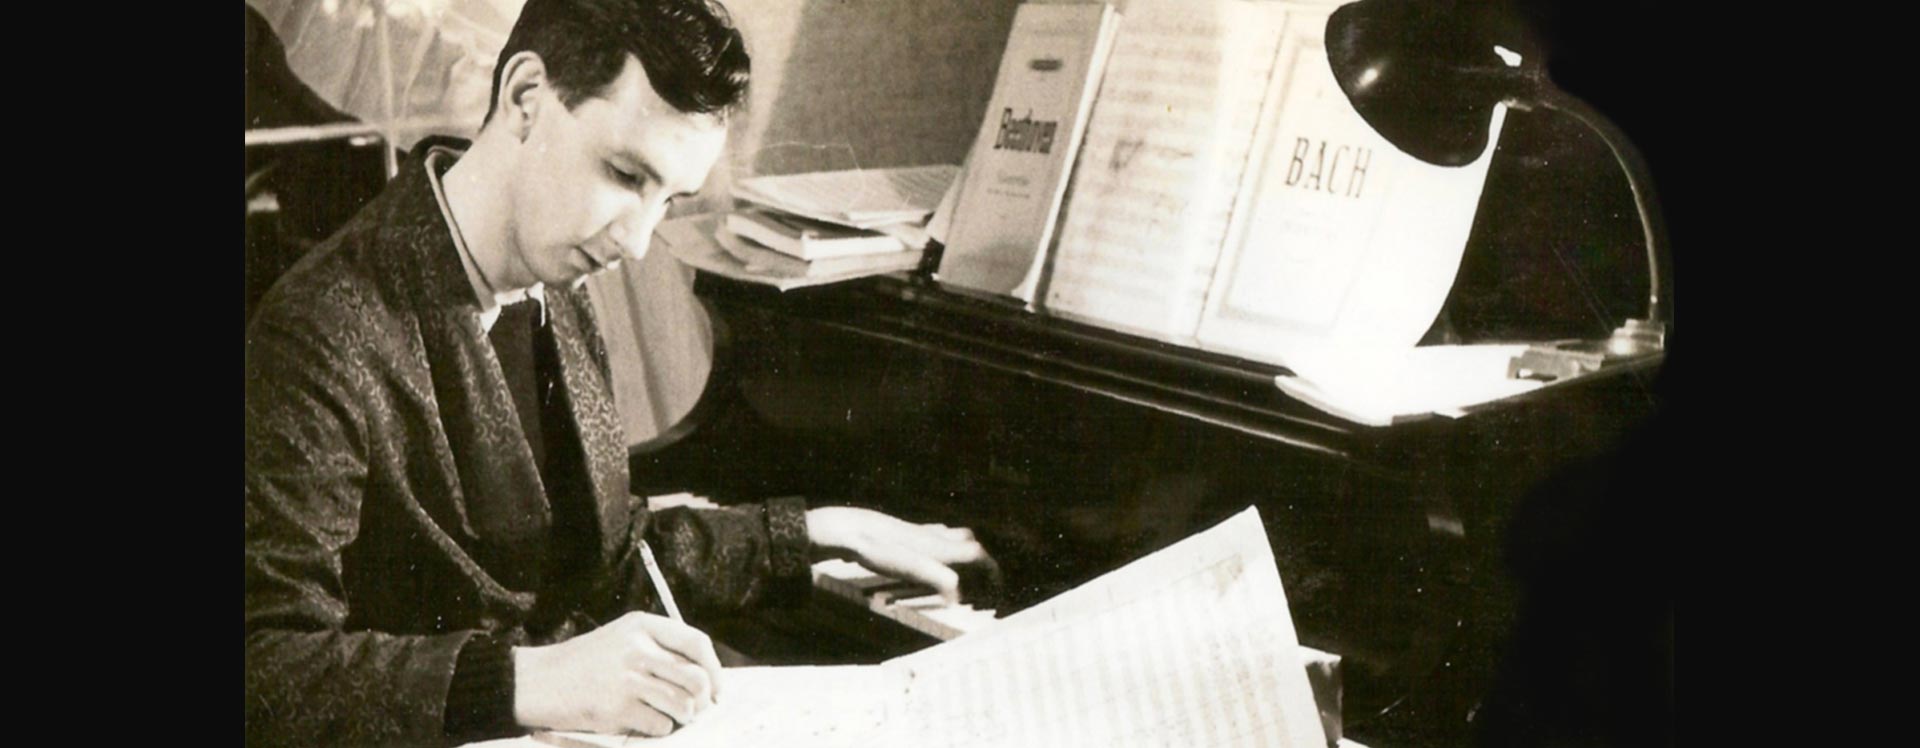 25-year-old Sauter at work on a score for the Benny Goodman big band.